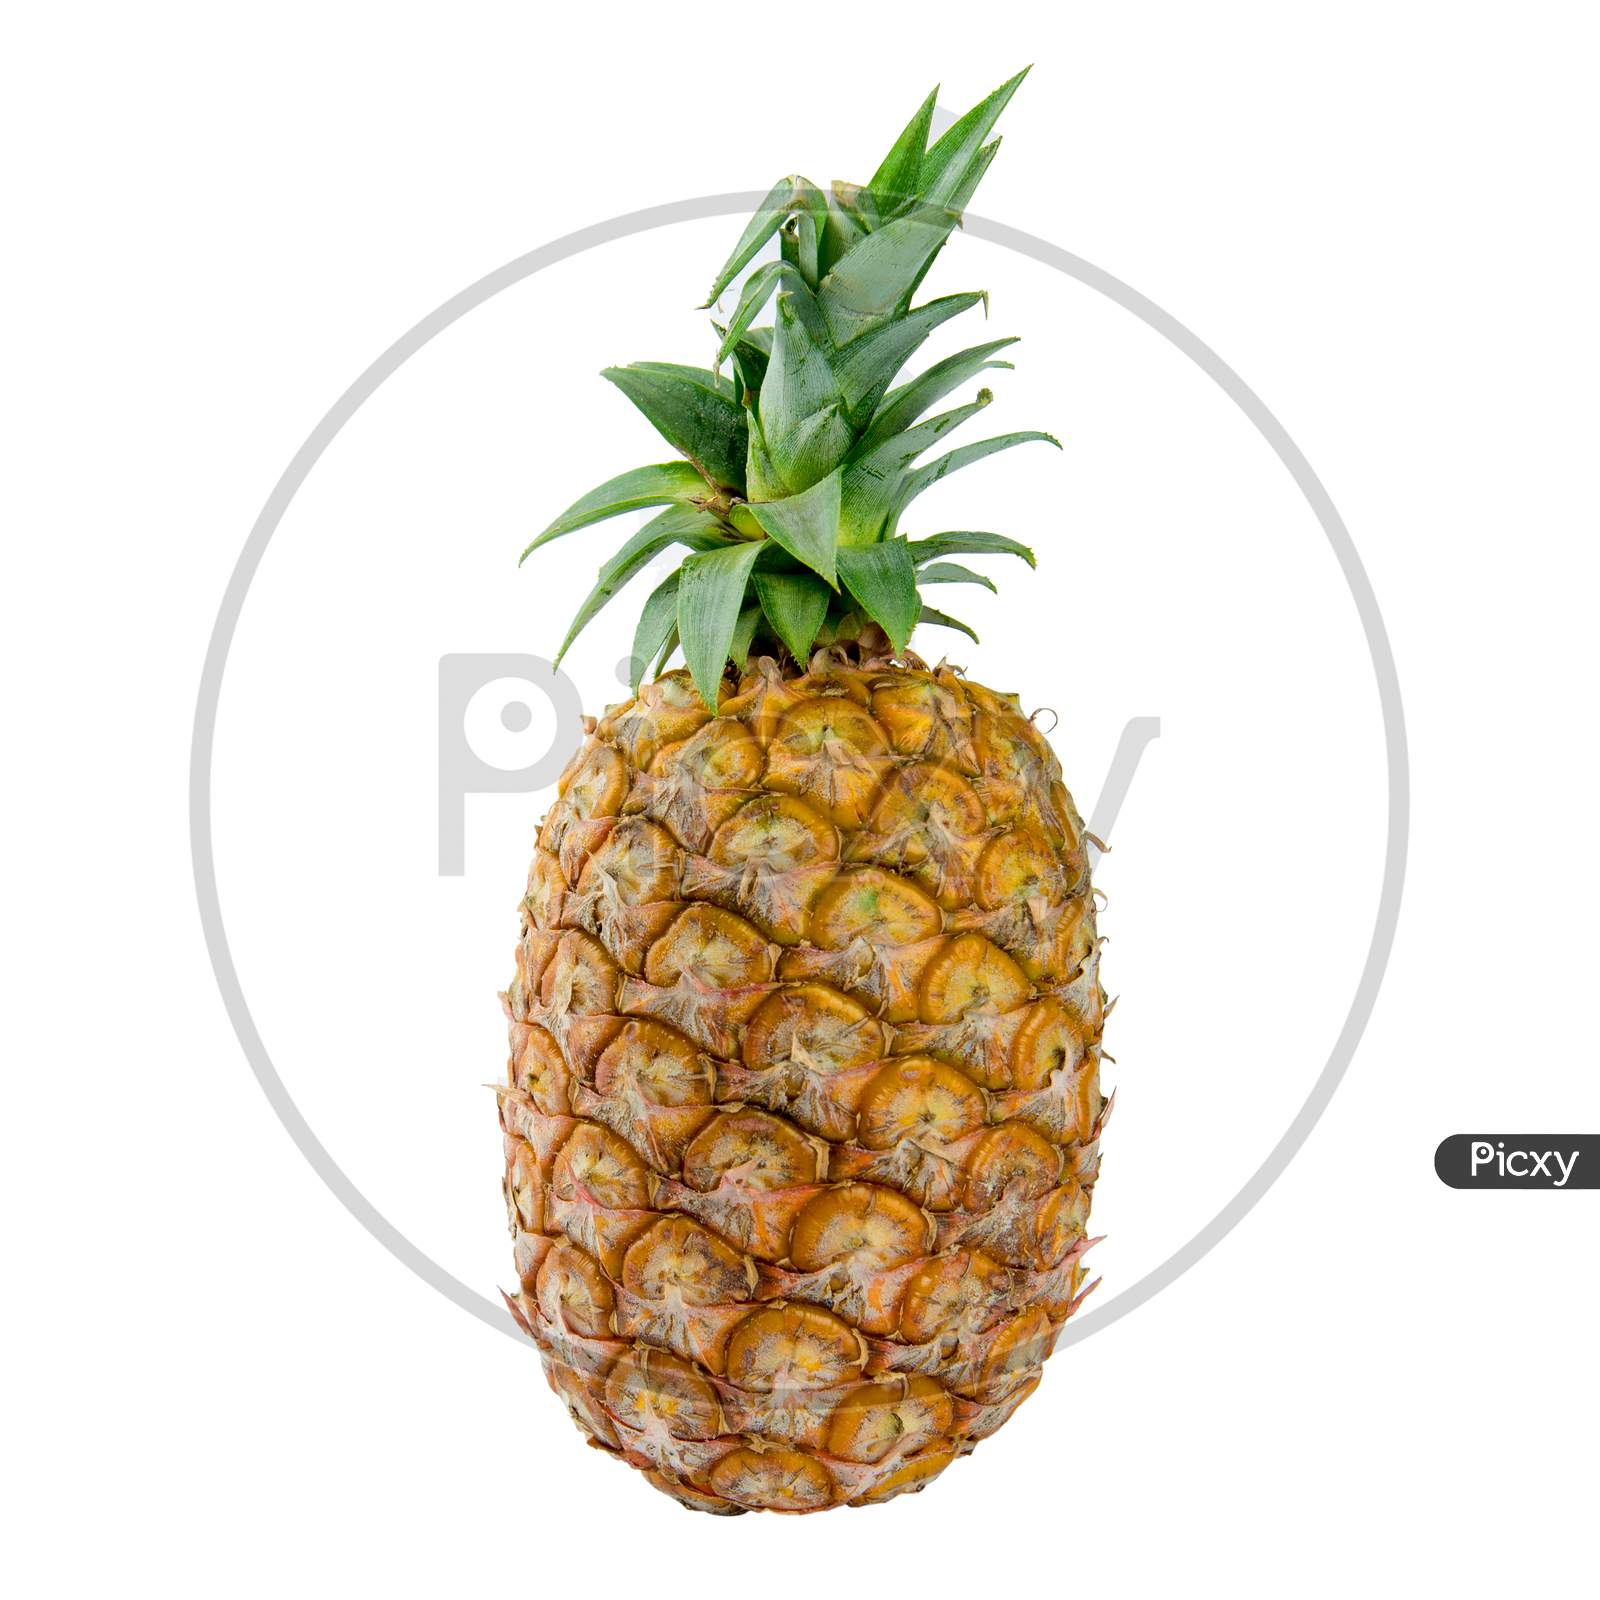 Pineapple On Isolated White Background. Food And Vegetable Concept. Clipping Path Use